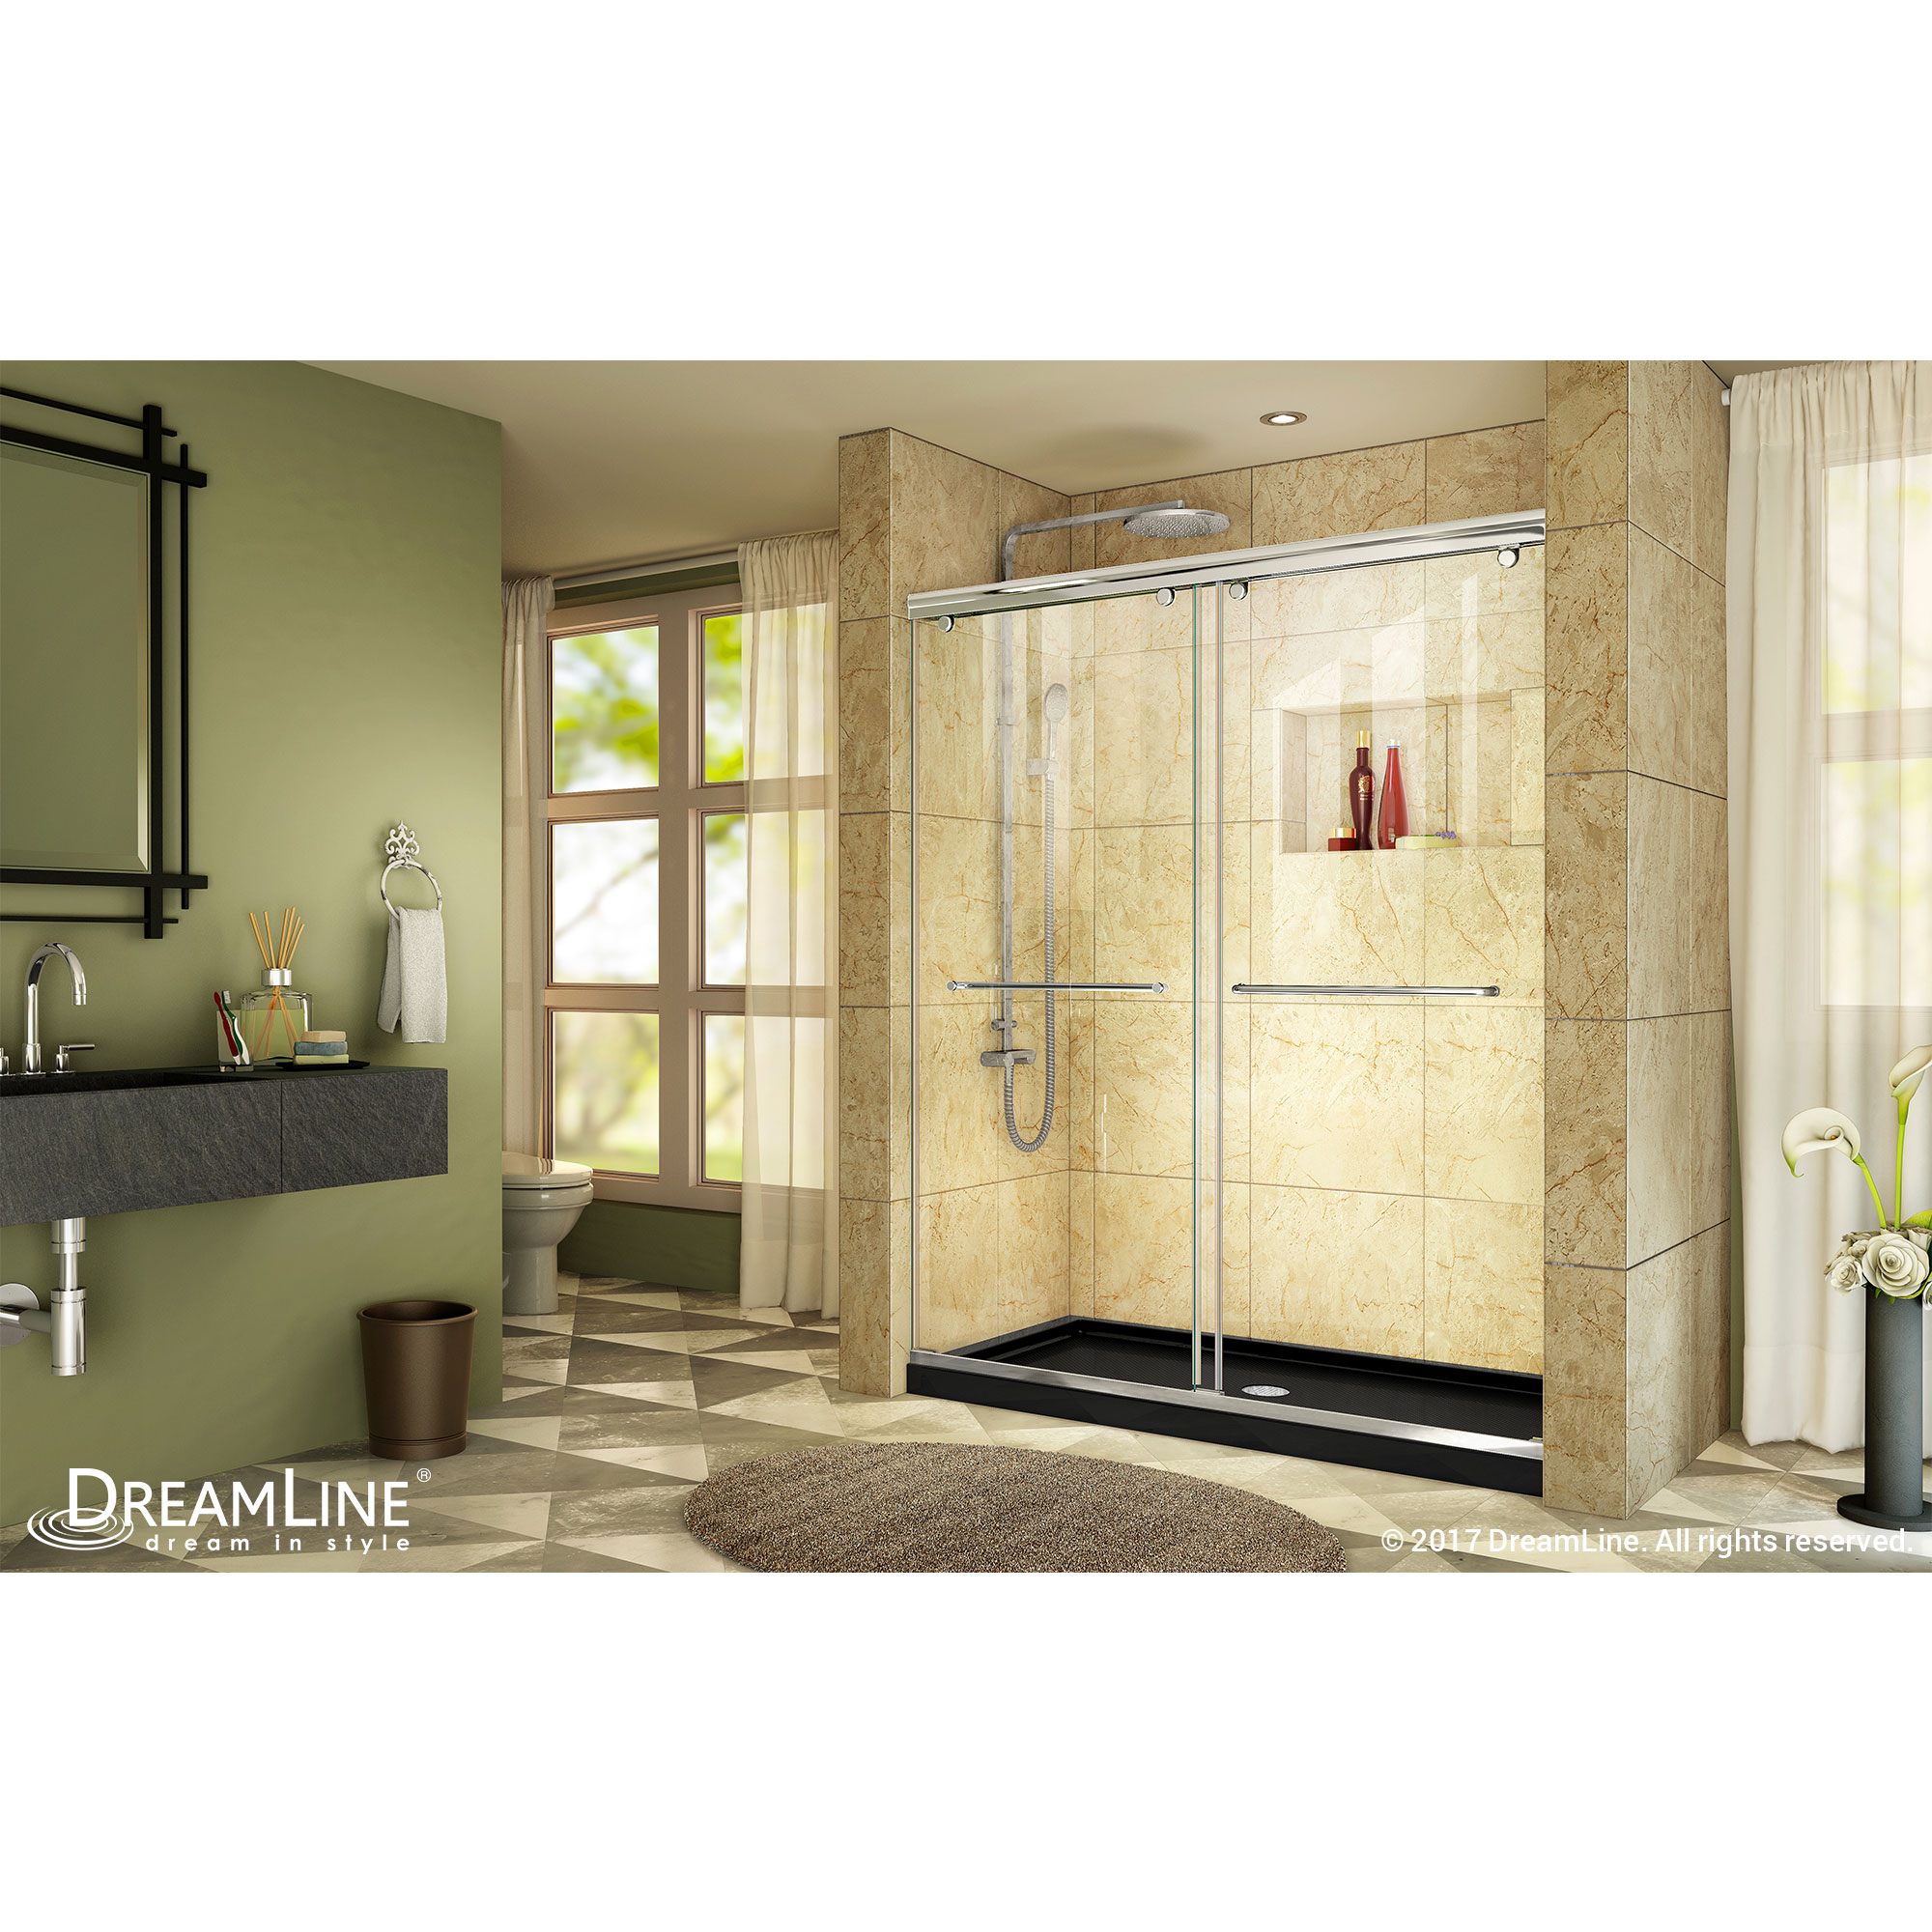 DreamLine Charisma 32 in. D x 60 in. W x 78 3/4 in. H Bypass Shower Door in Chrome with Center Drain Black Base Kit